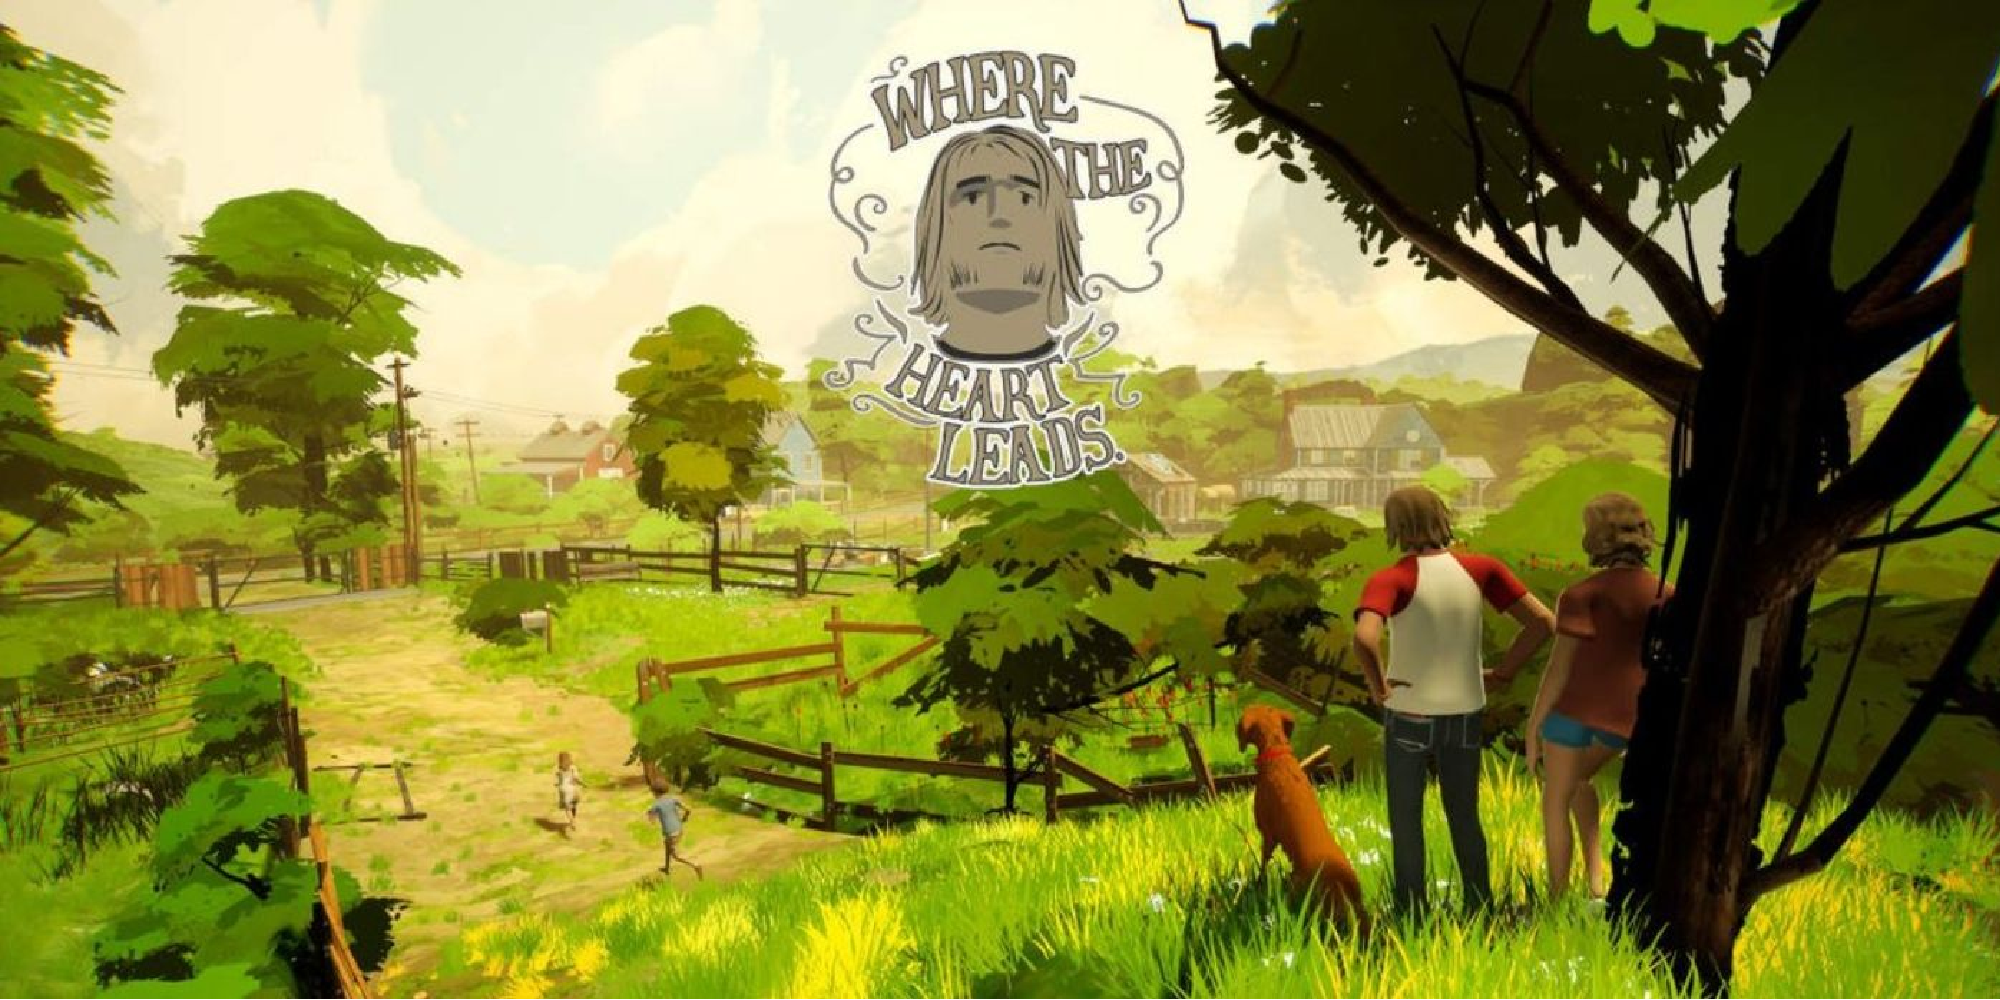 Where the Hearts Leads Review